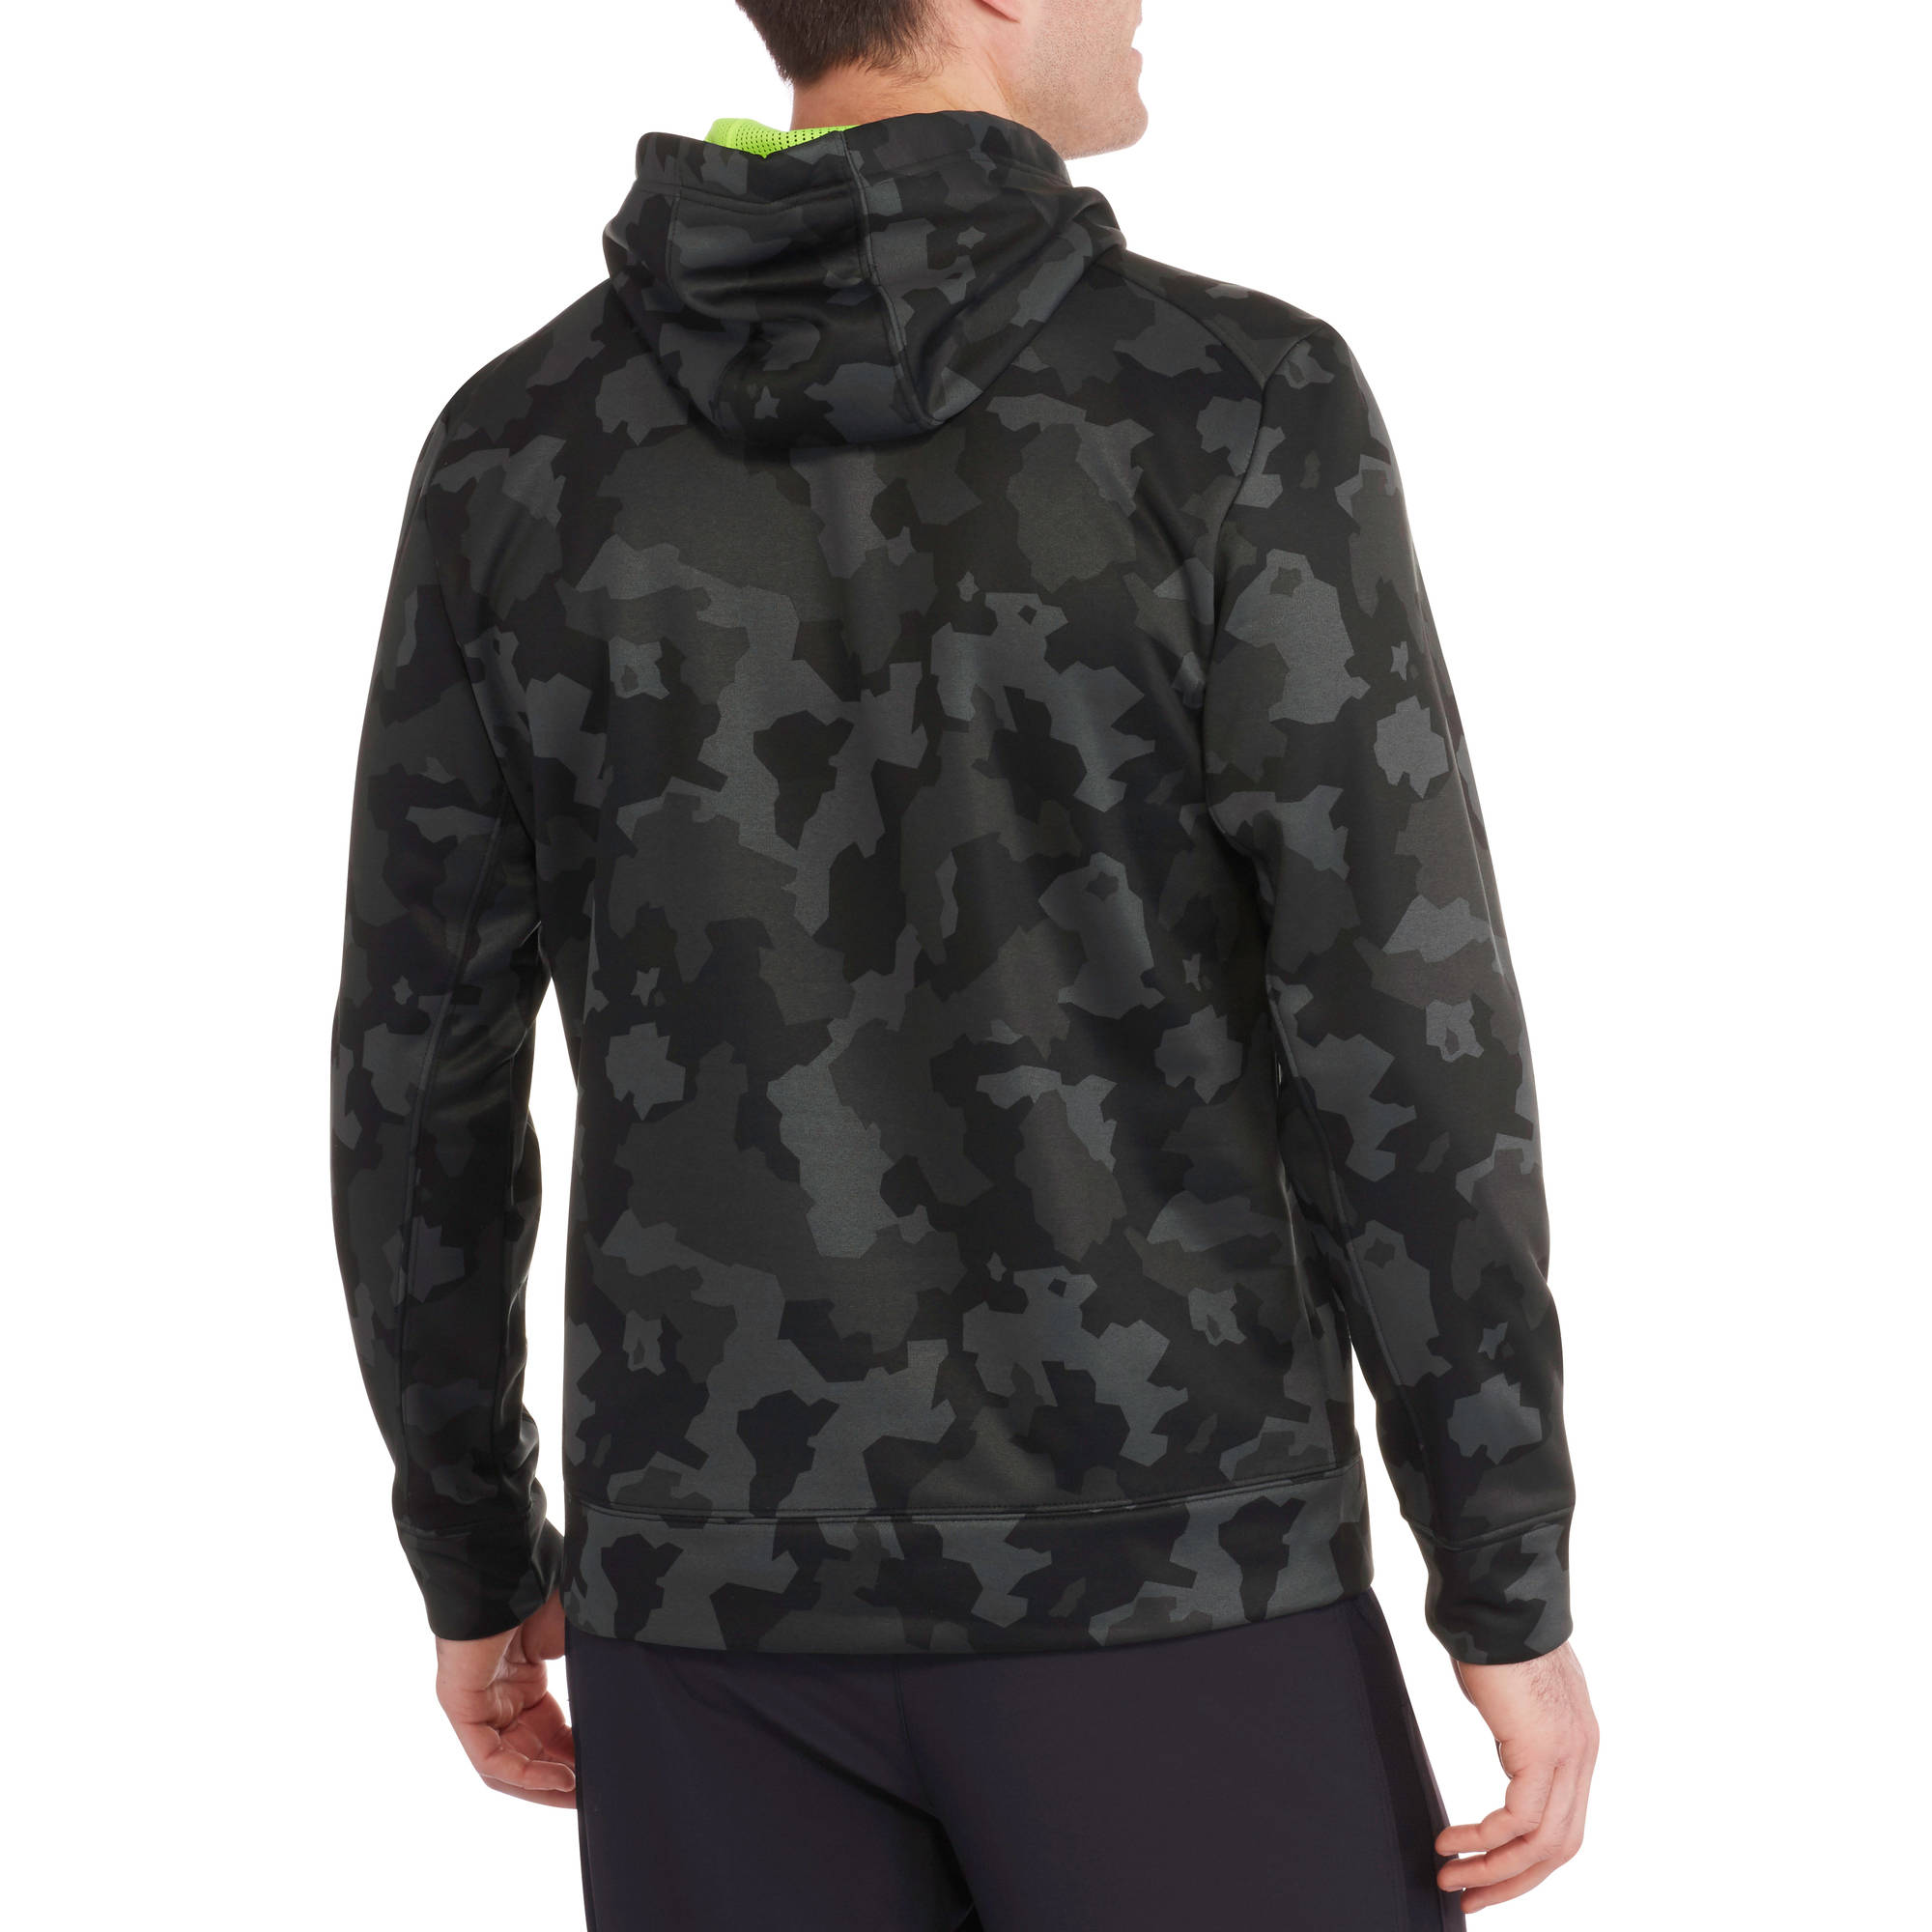 Men's Polytech Pullover - image 2 of 2